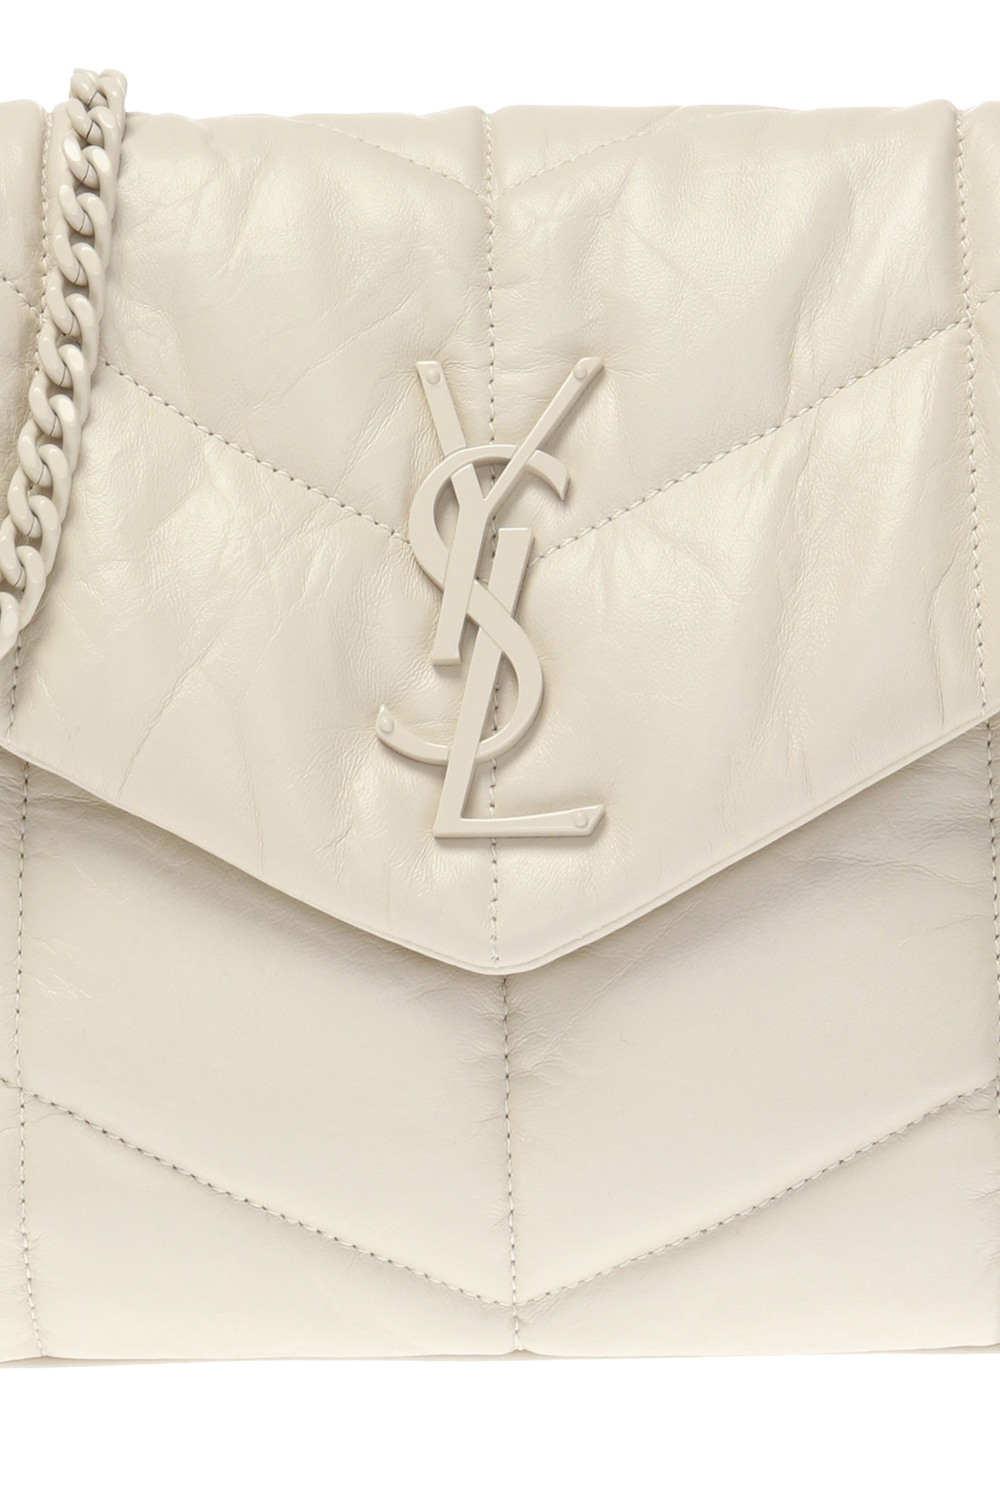 Saint Laurent Quilted Wool Loulou Puffer Shoulder Bag (SHF-19271) – LuxeDH